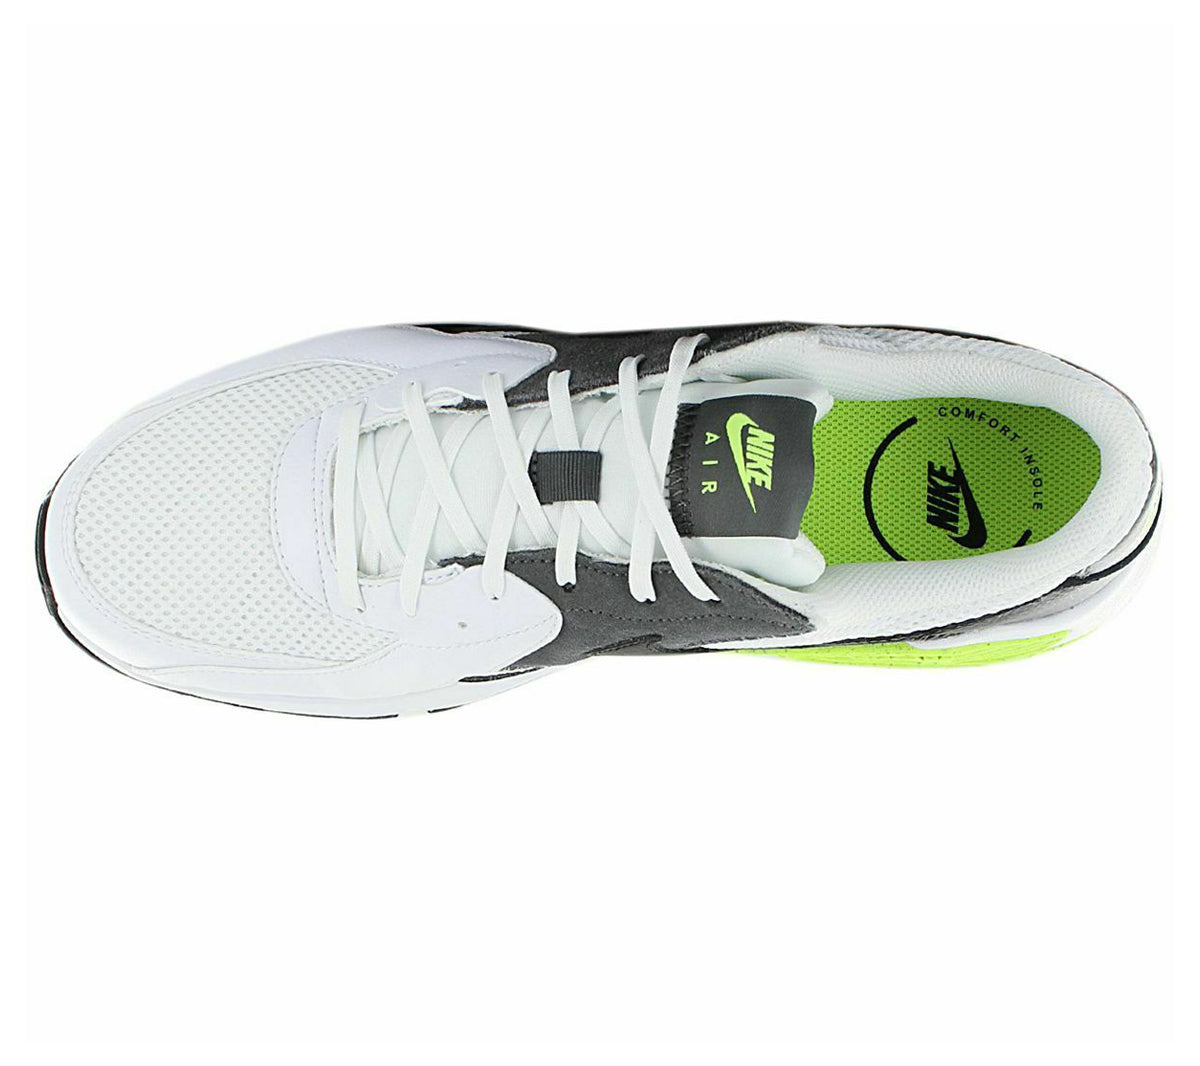 Nike Air Max Excee White Grey Volt